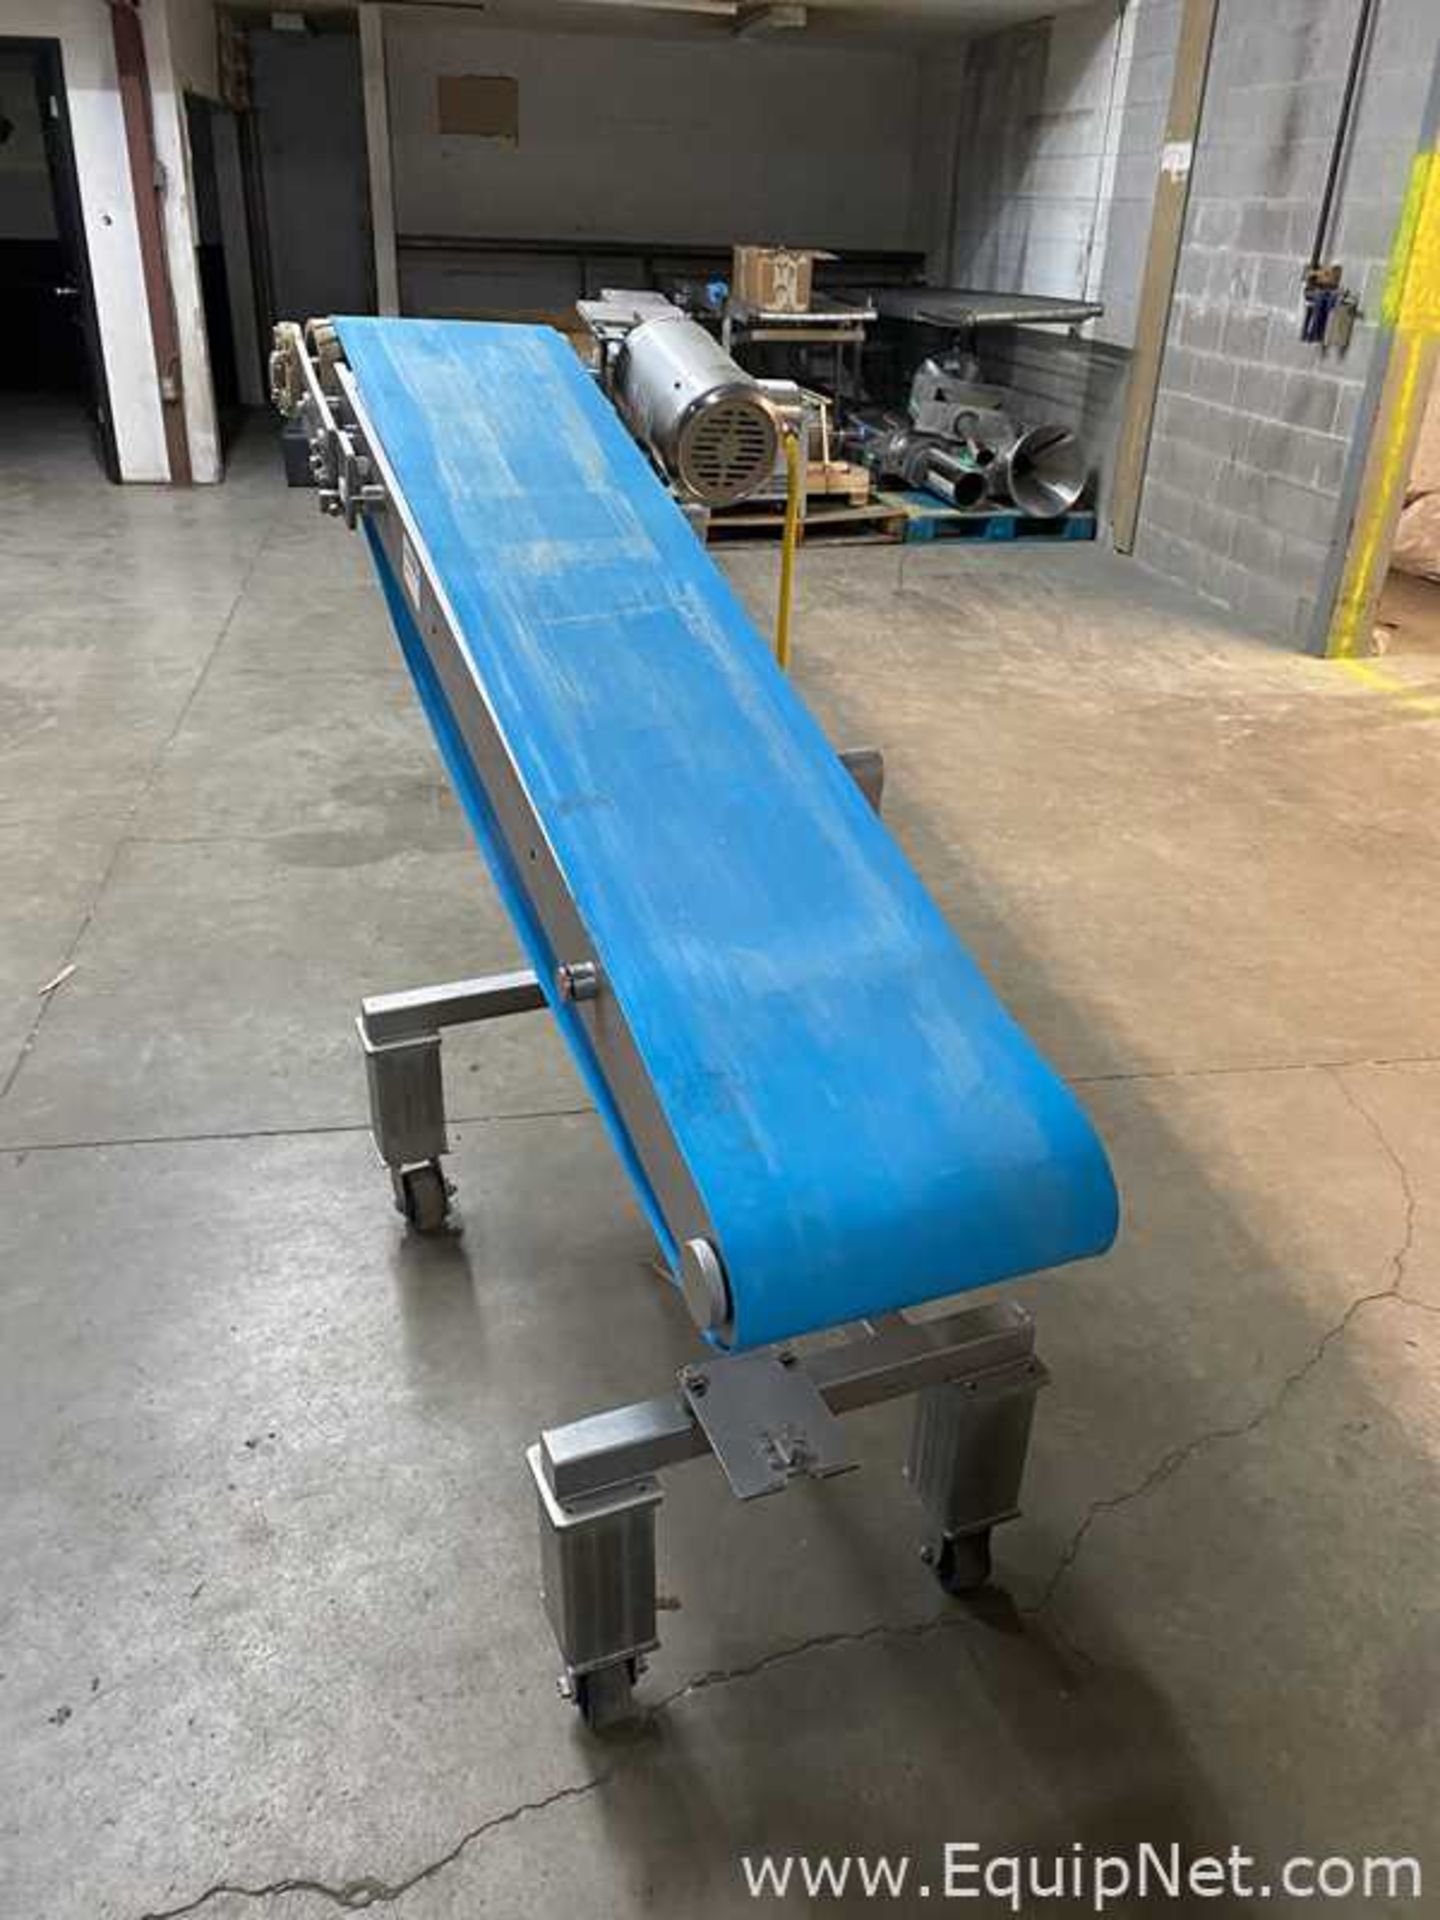 Carruthers AdvantEdge AE5000 Dicer With CV79000 Incline Conveyor Belt - Image 16 of 21